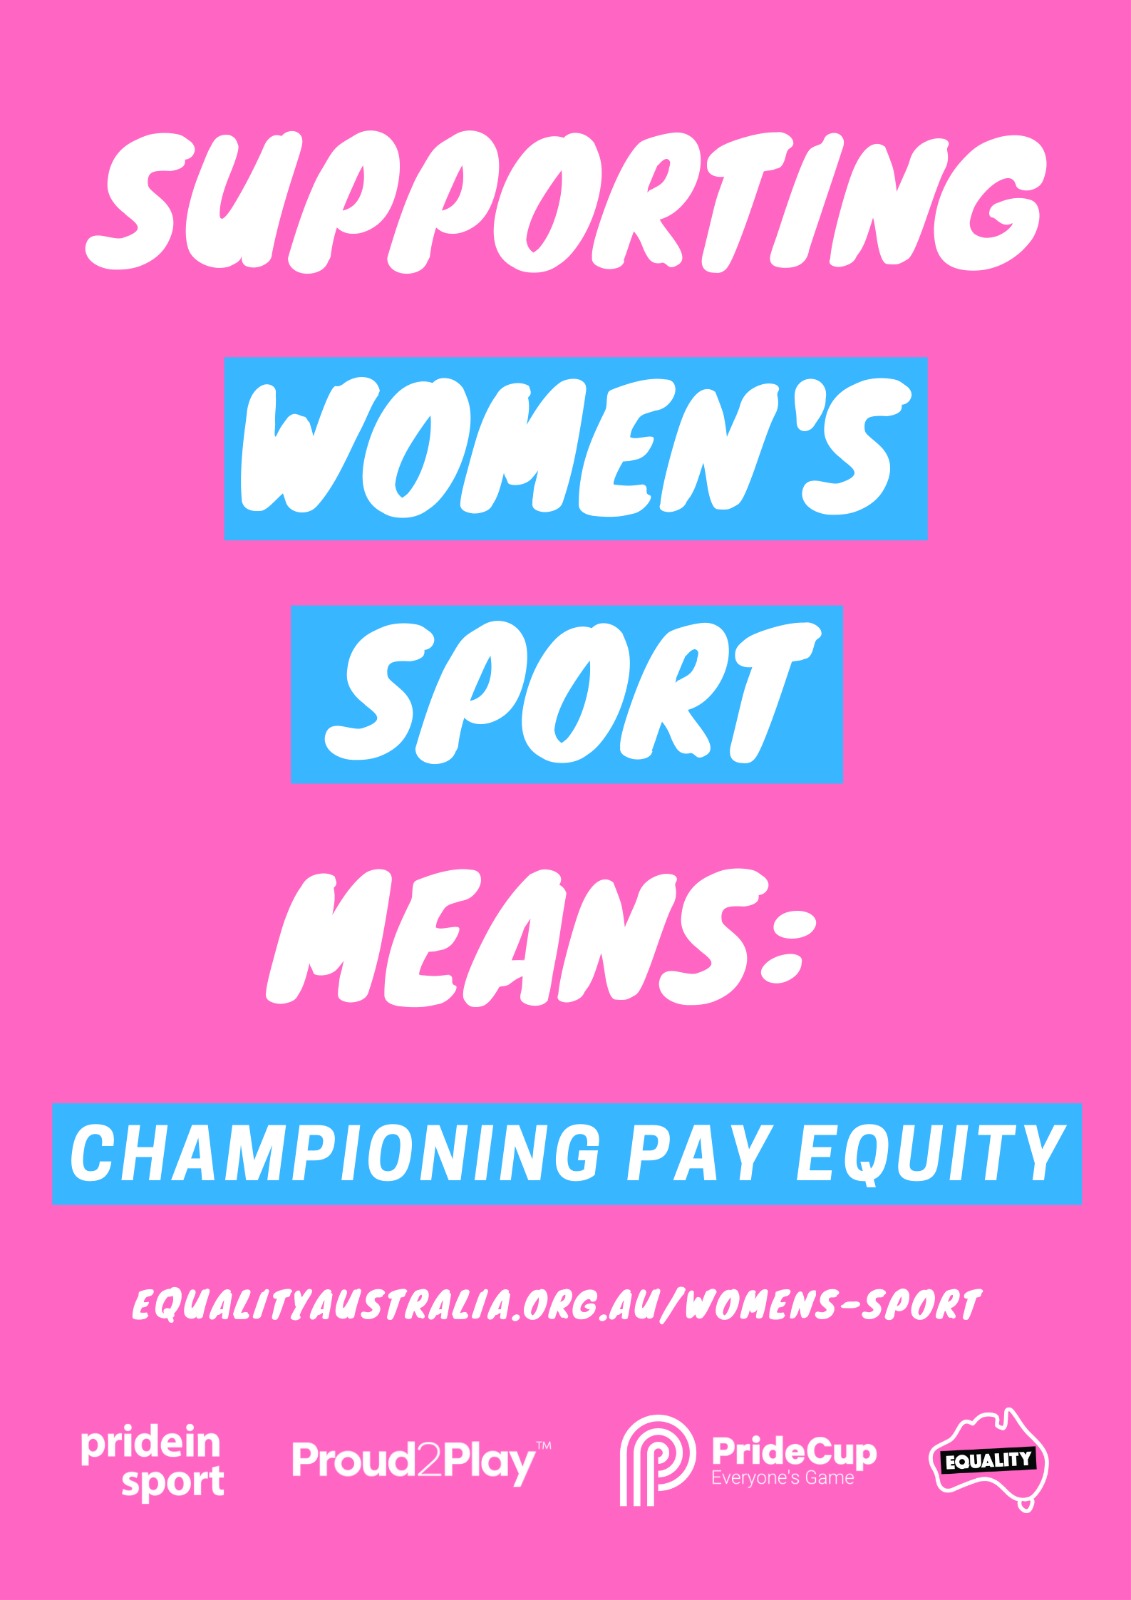 Supporting women's sport means championing pay equity